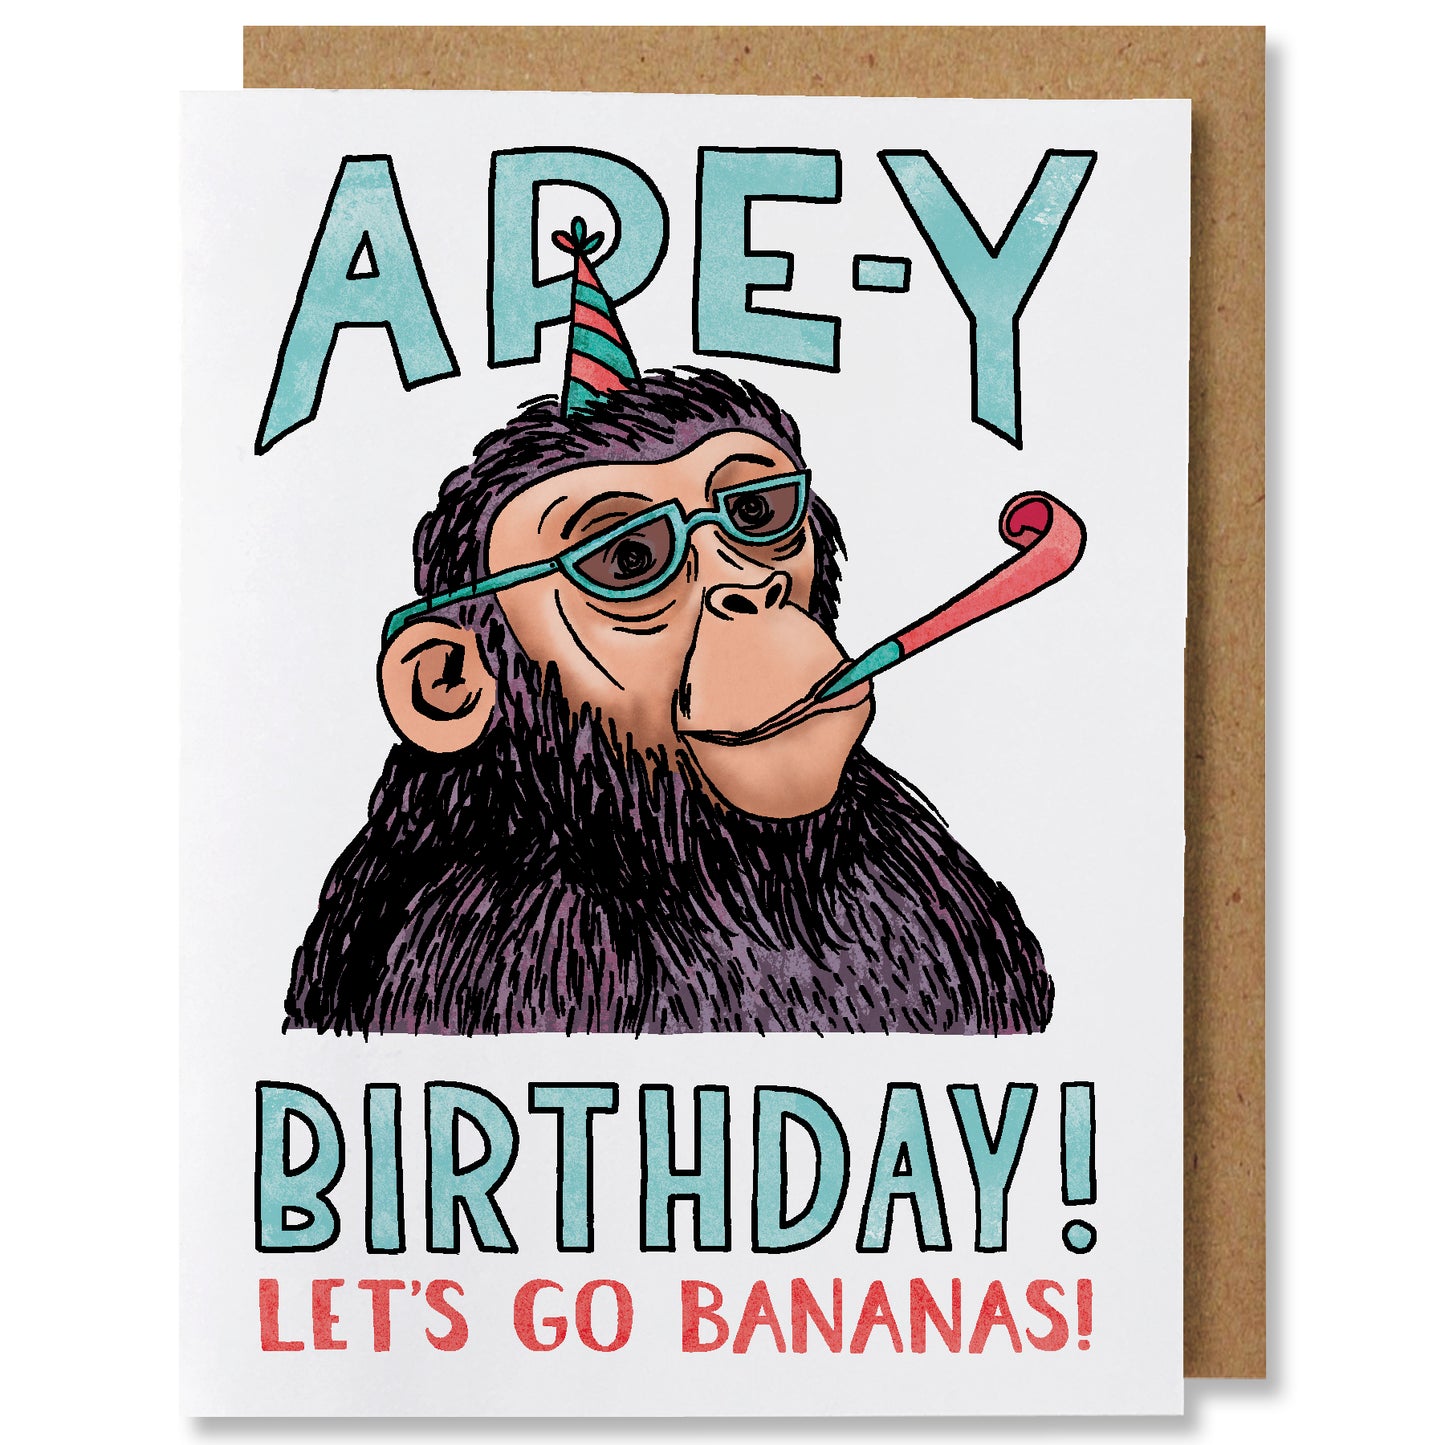 An illustrated greeting card featuring an ape wearing blue sunglasses and a red and blue striped party hat with with a noisemaker in it's mouth he caption "ape-y birthday!" and "let's go bananas"